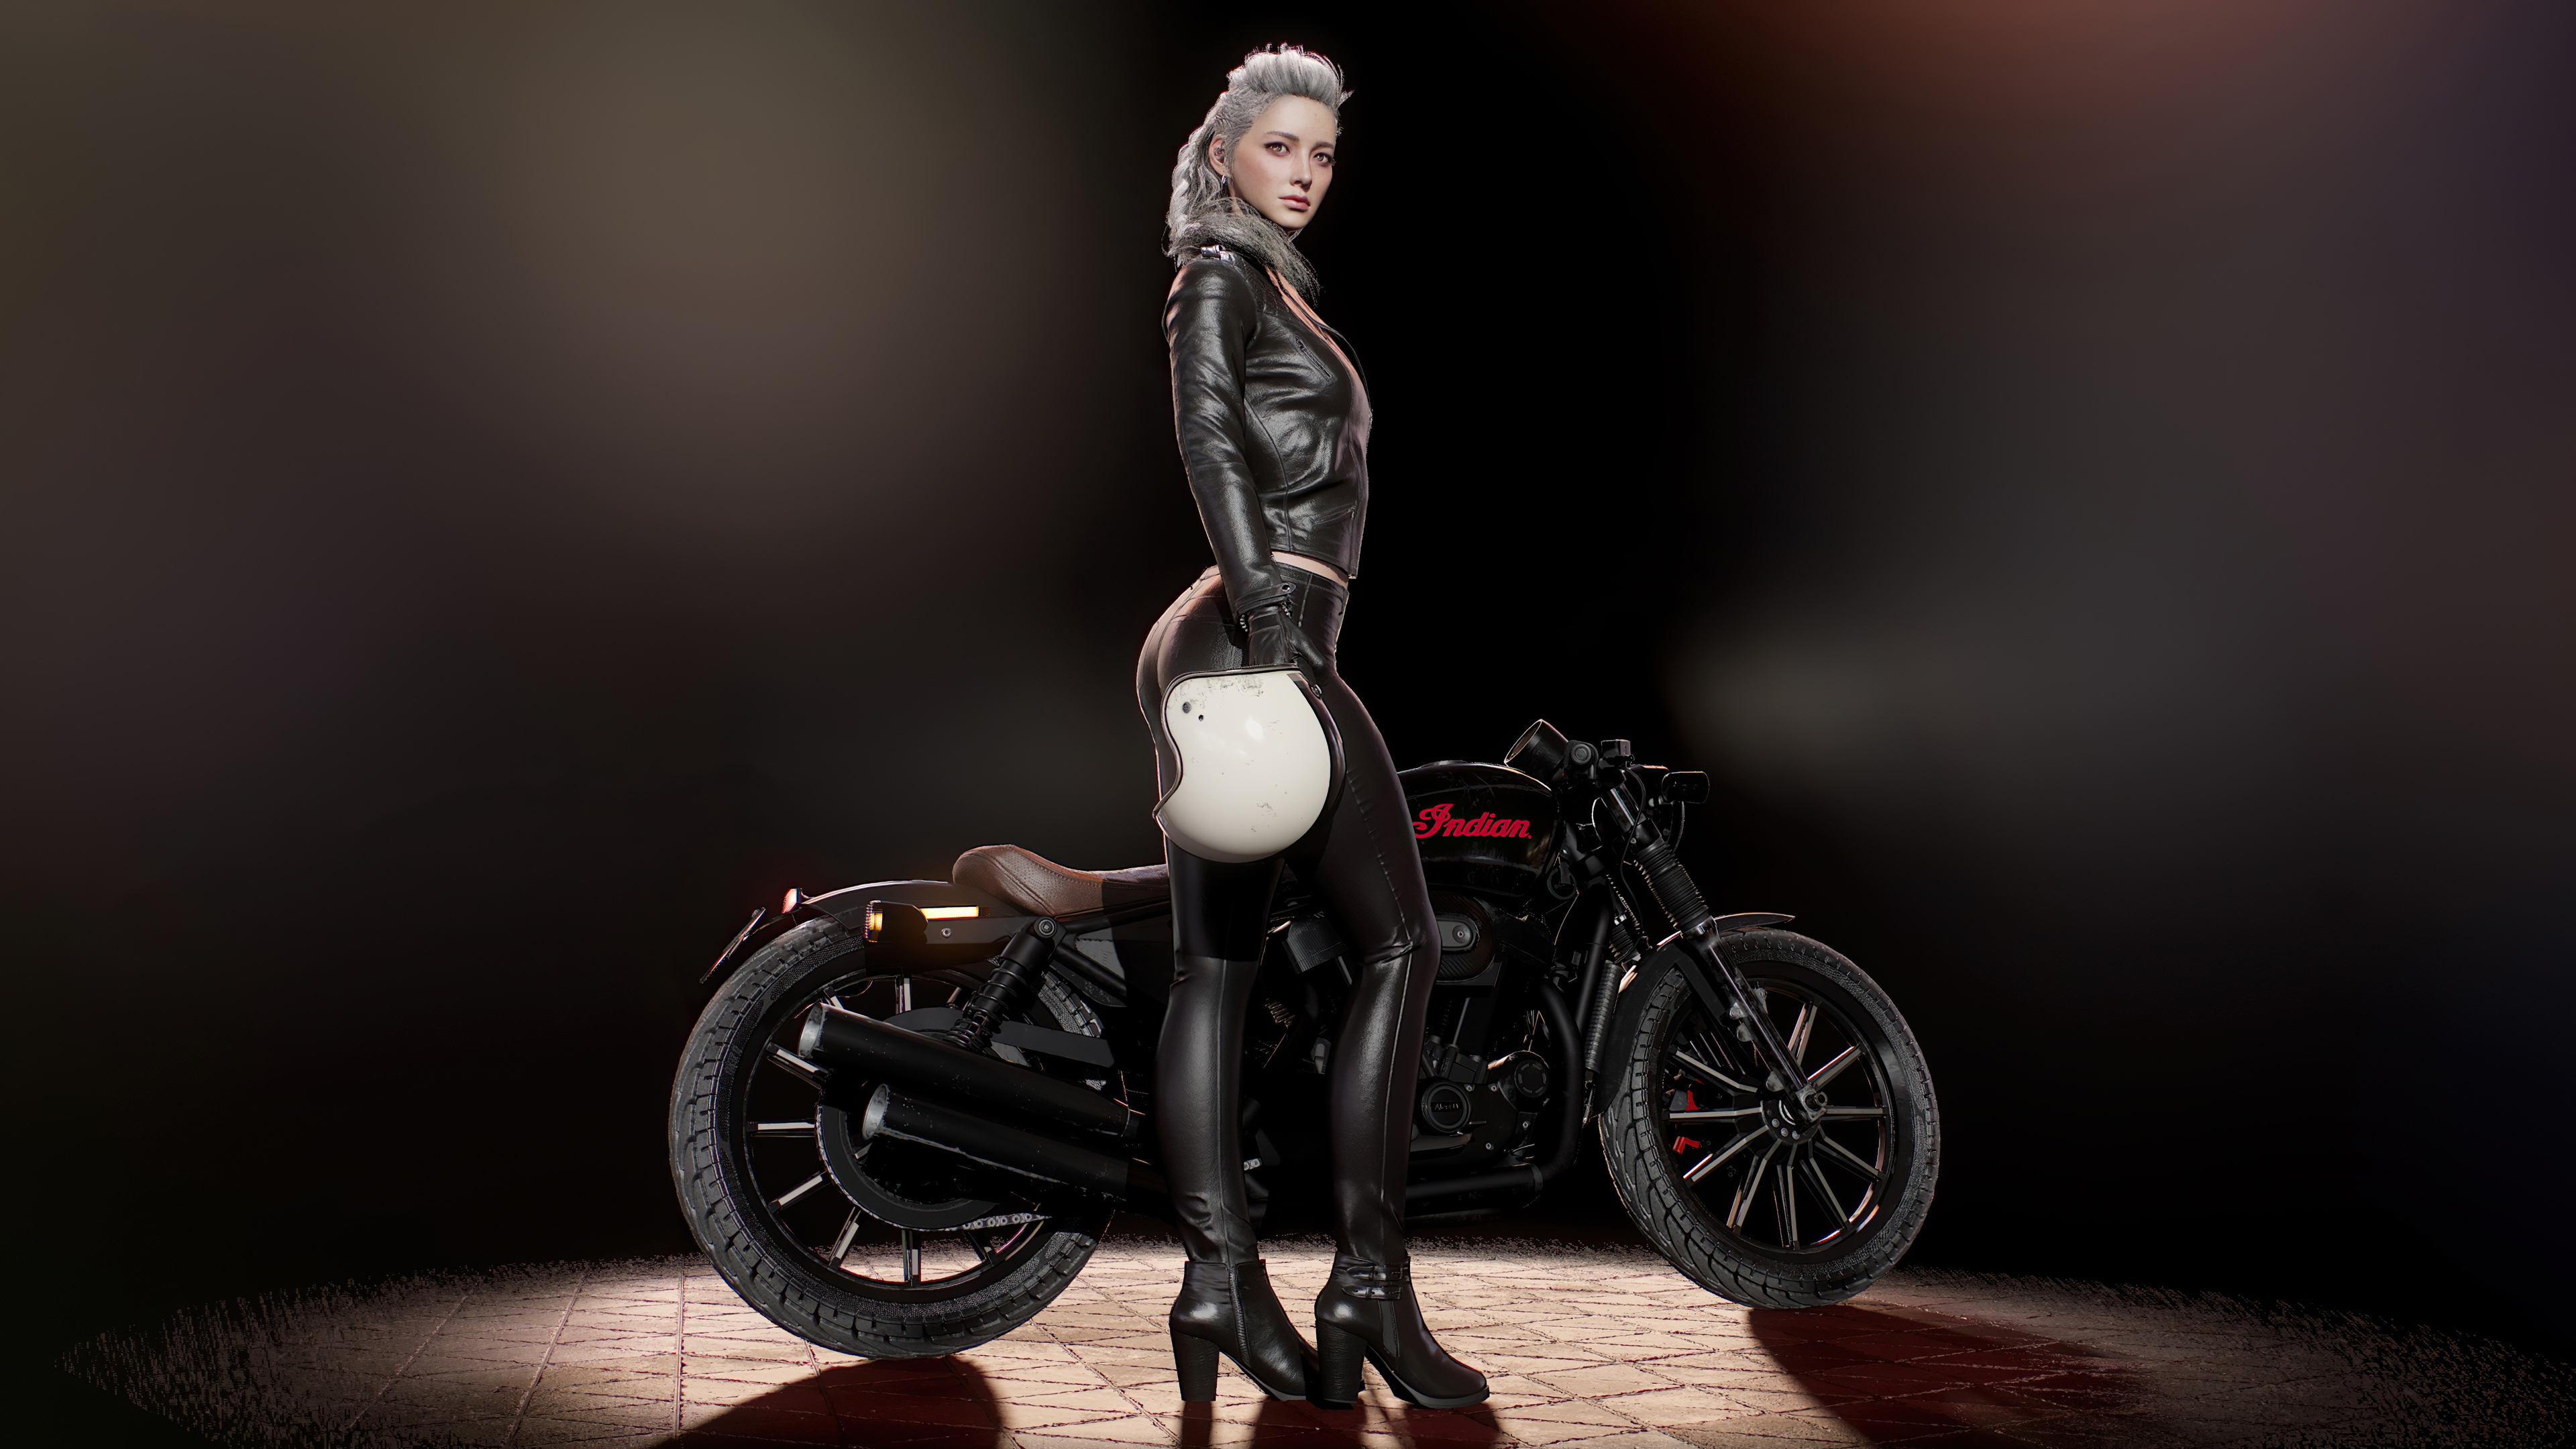 Girl With Harley Davidson, HD Artist, 4k Wallpapers, Images, Backgrounds,  Photos and Pictures